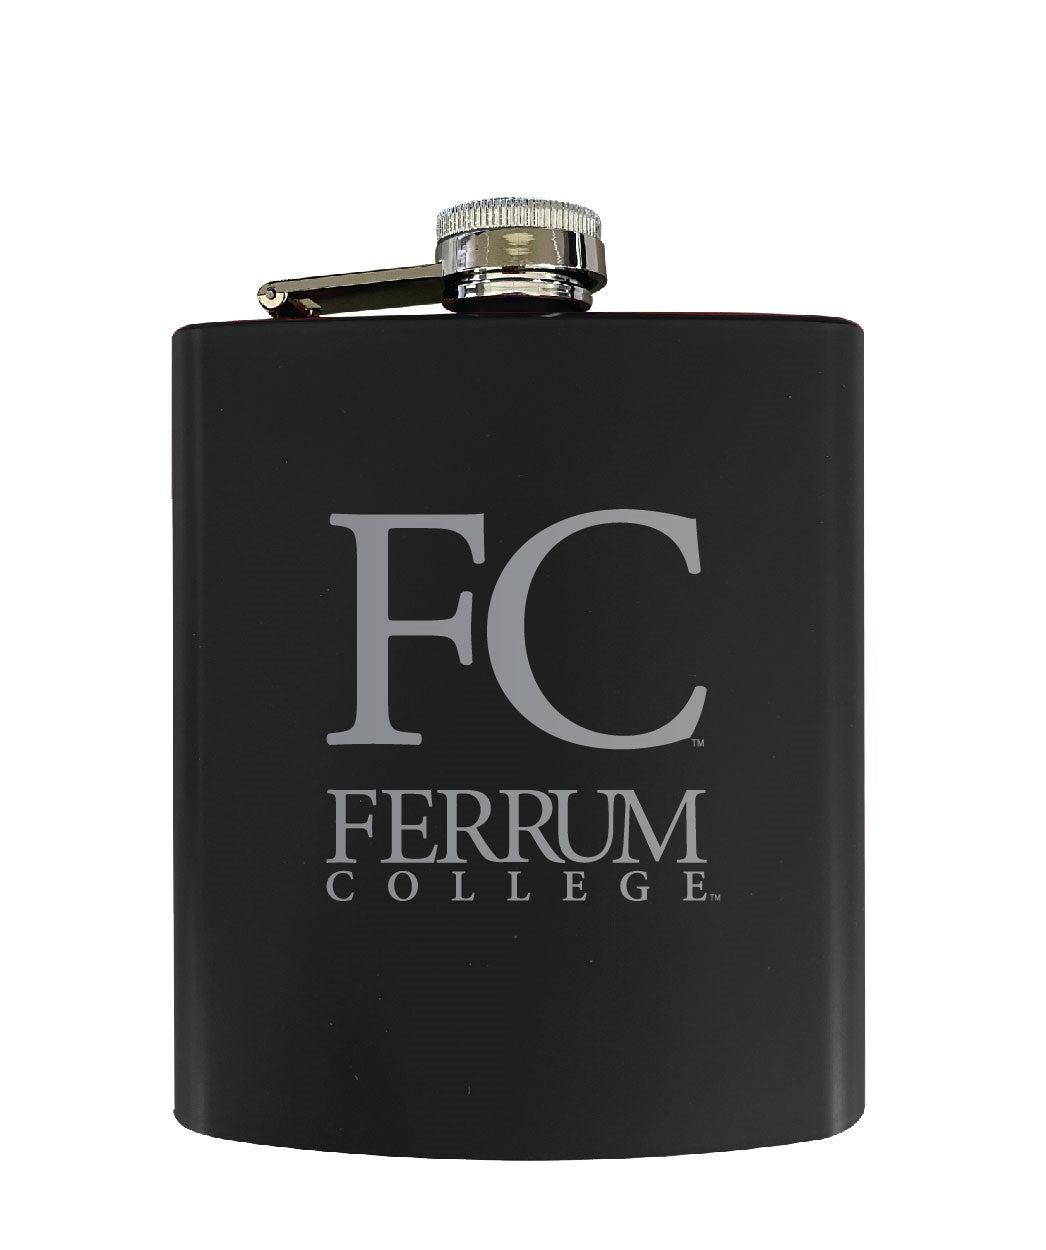 Ferrum College Stainless Steel Etched Flask - Choose Your Color